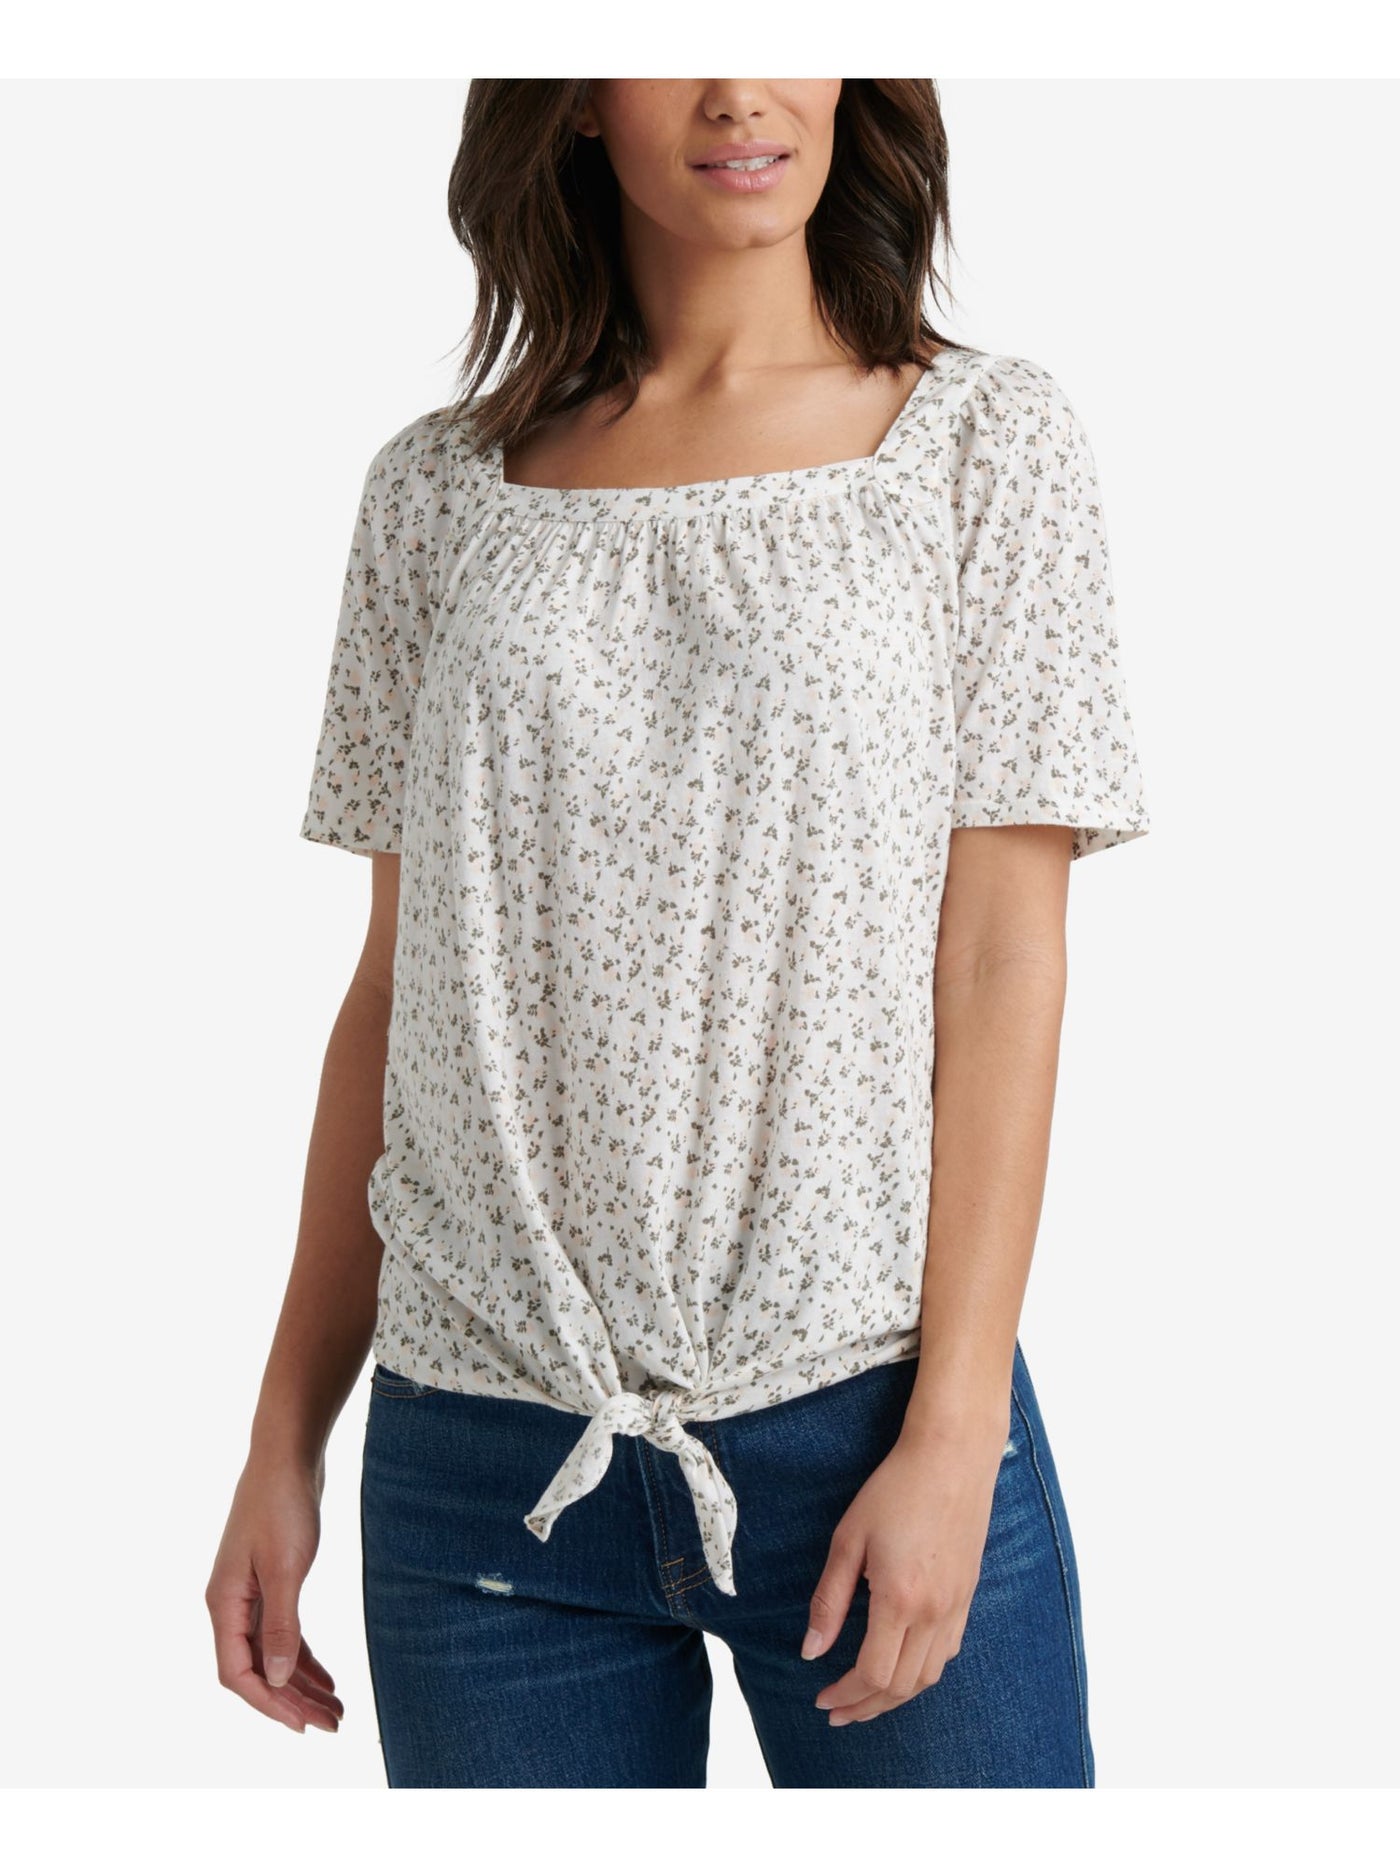 LUCKY BRAND Womens Ivory Printed Short Sleeve Square Neck Top Size: XS